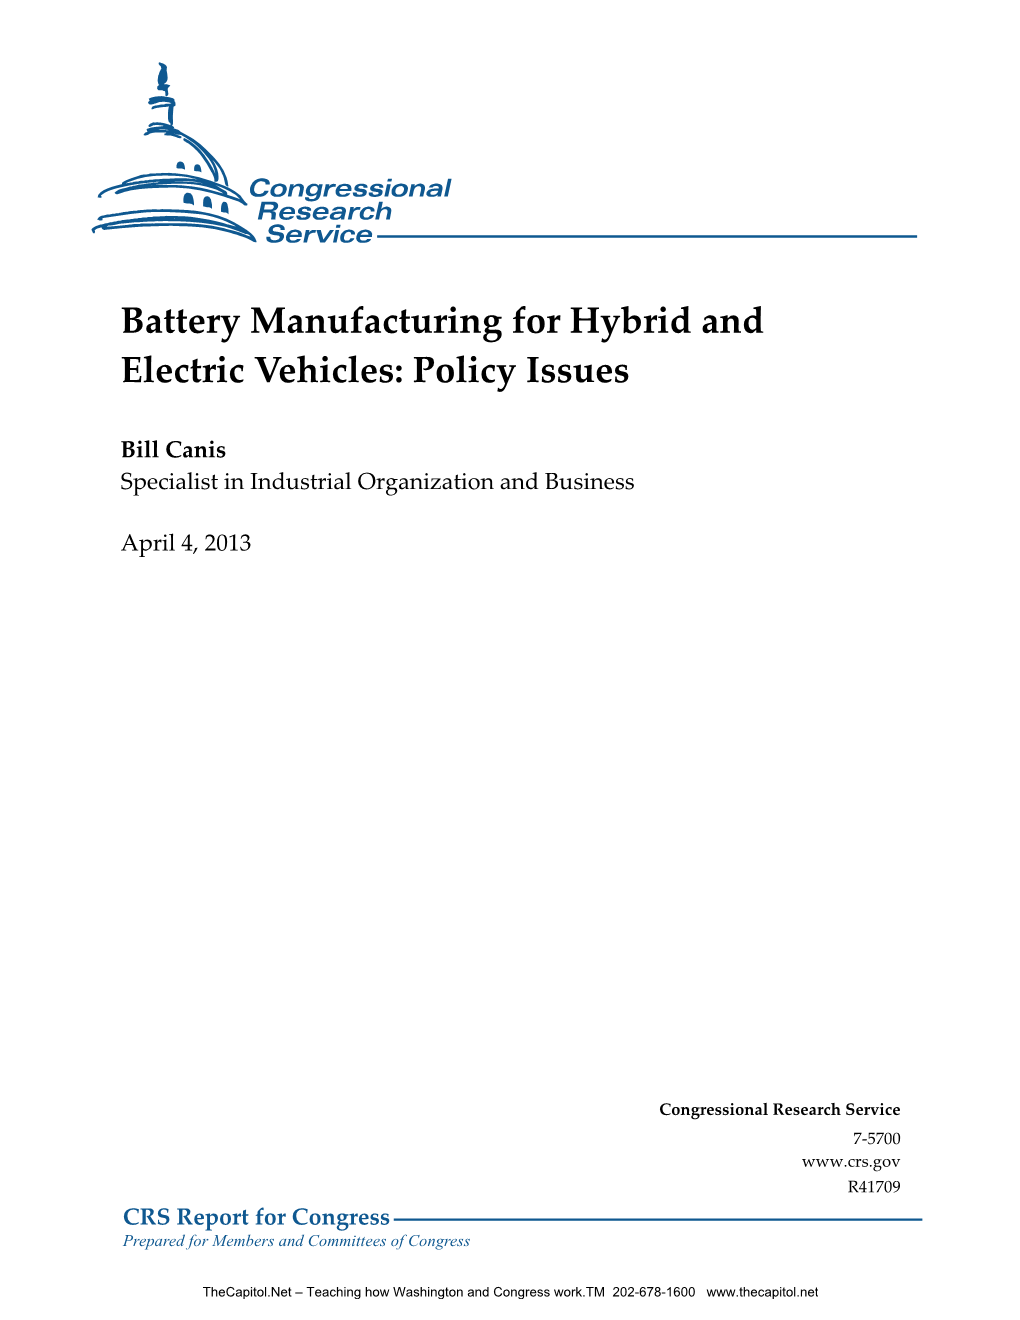 Battery Manufacturing for Hybrid and Electric Vehicles: Policy Issues